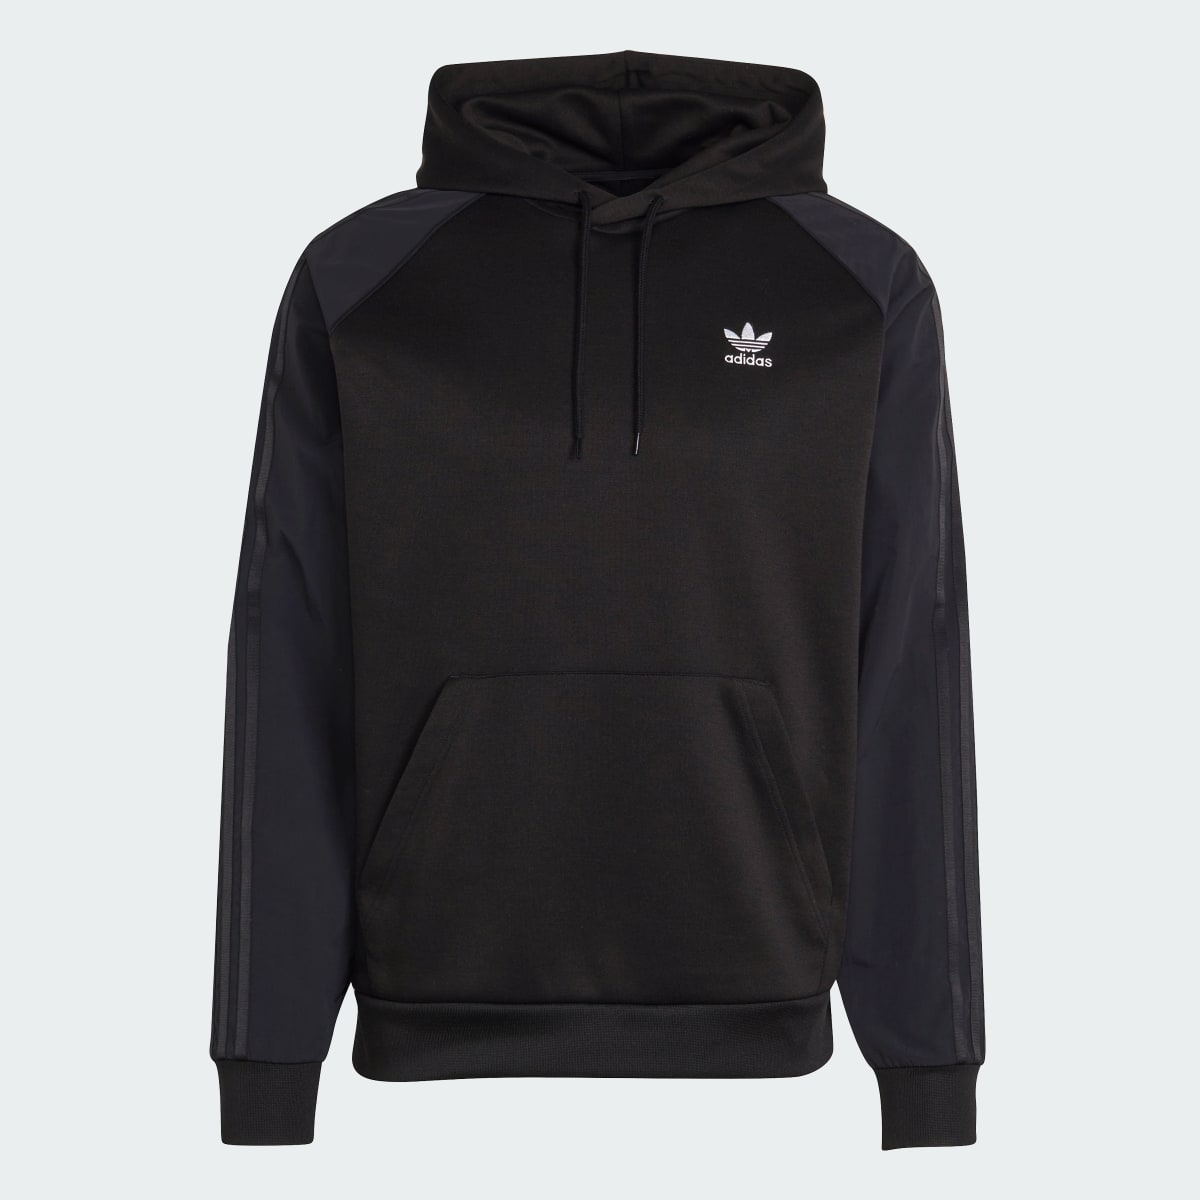 Adidas Adicolor Re-Pro SST Material Mix Hoodie. 6